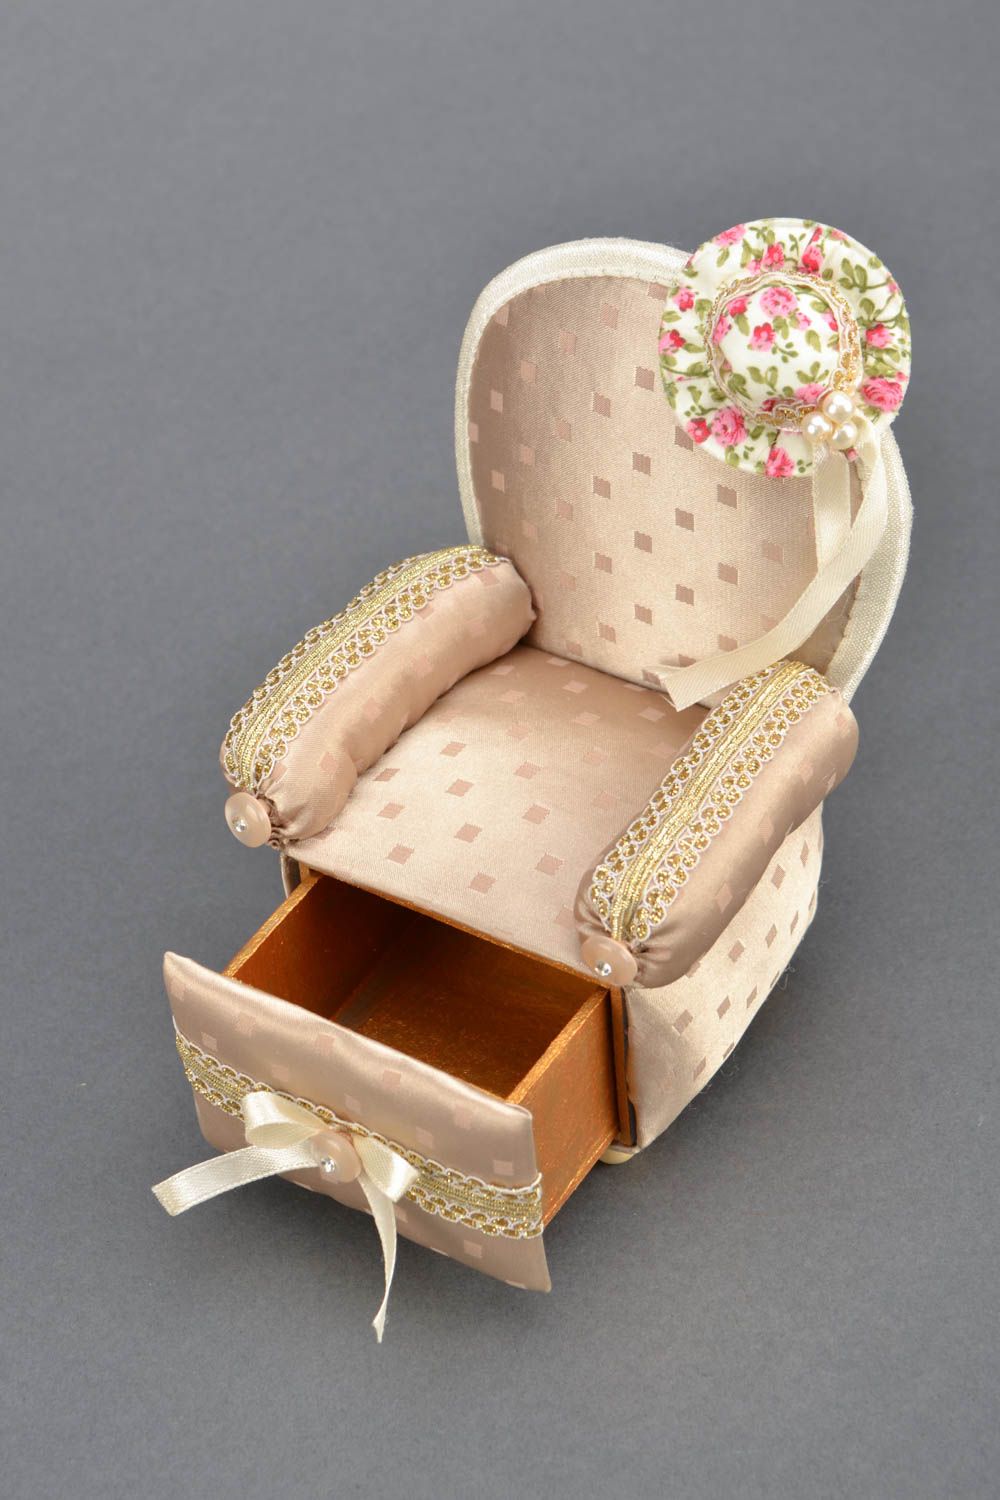 Designer jewelry box in the shape of armchair photo 3